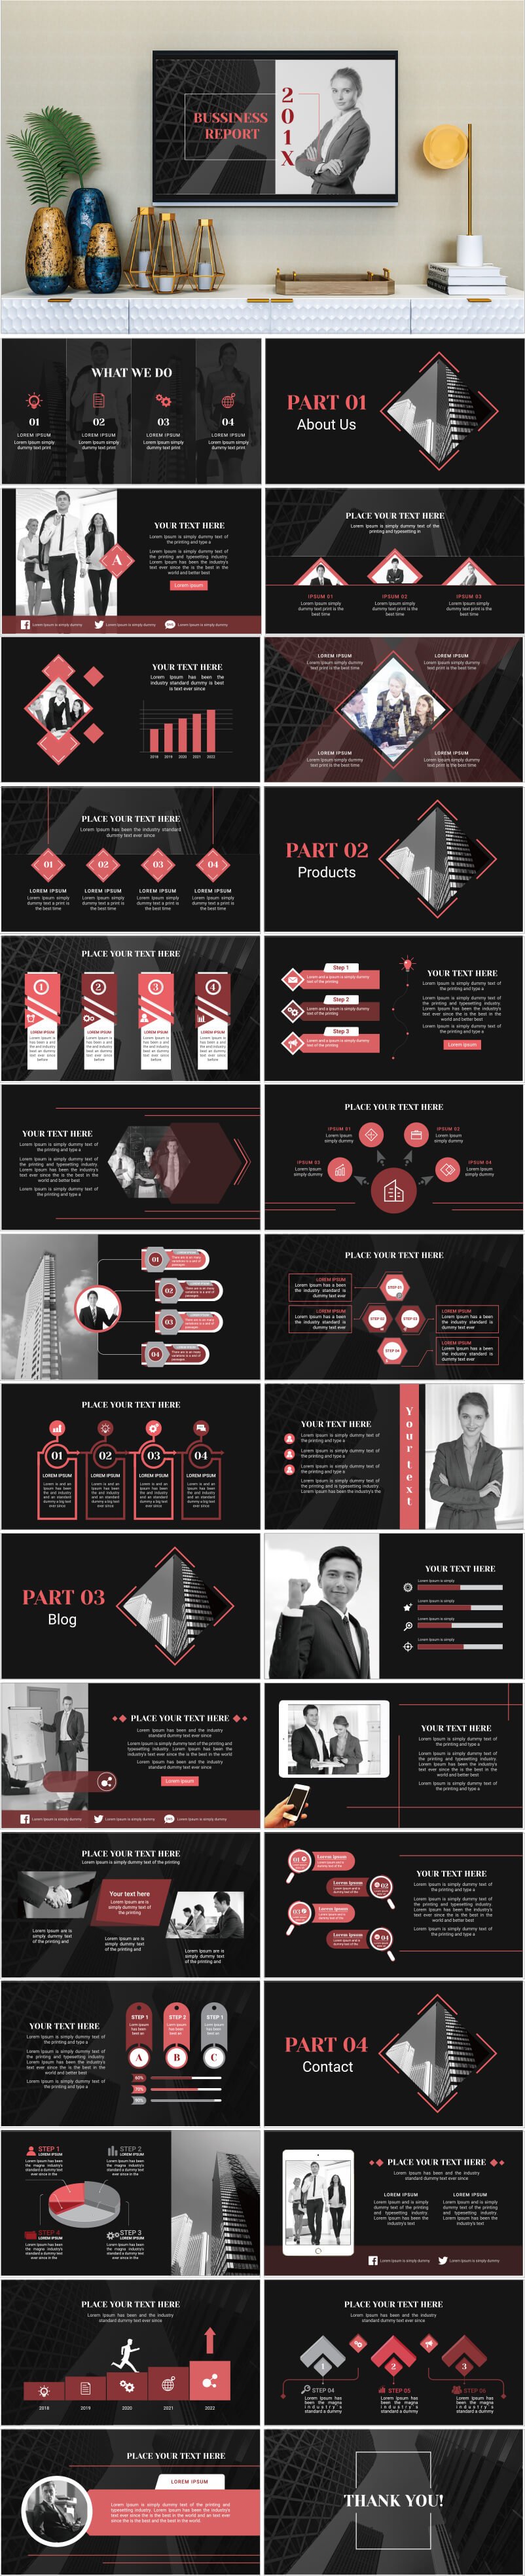 PowerPoint template vol.22